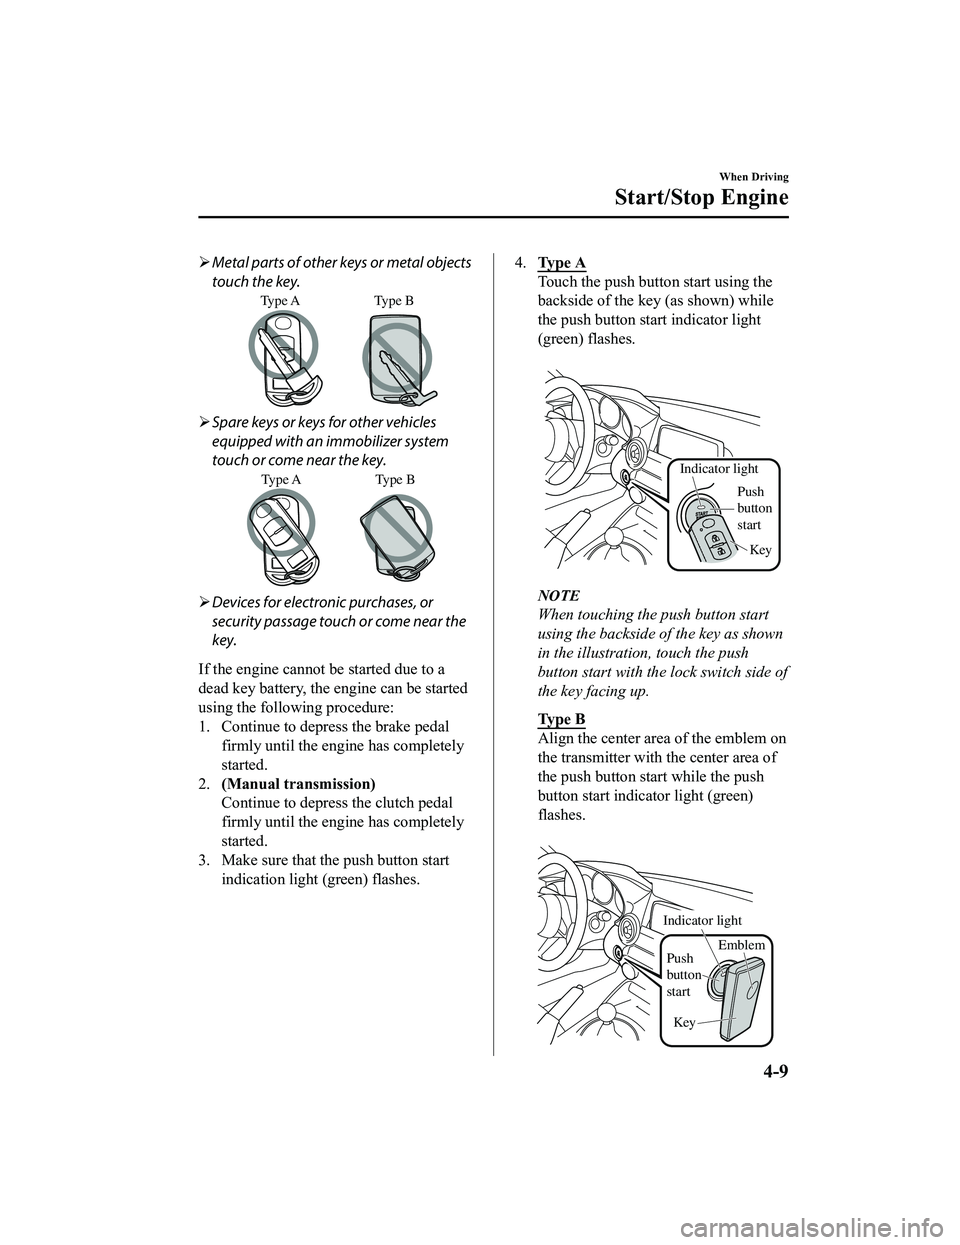 MAZDA MODEL MX-5 MIATA RF 2020  Owners Manual Metal parts of other keys or metal objects
touch the key.
Type A Type  B
Spare keys or keys for other vehicles
equipped with an immobilizer system
touch or come near the key.
Type A Type  B
D